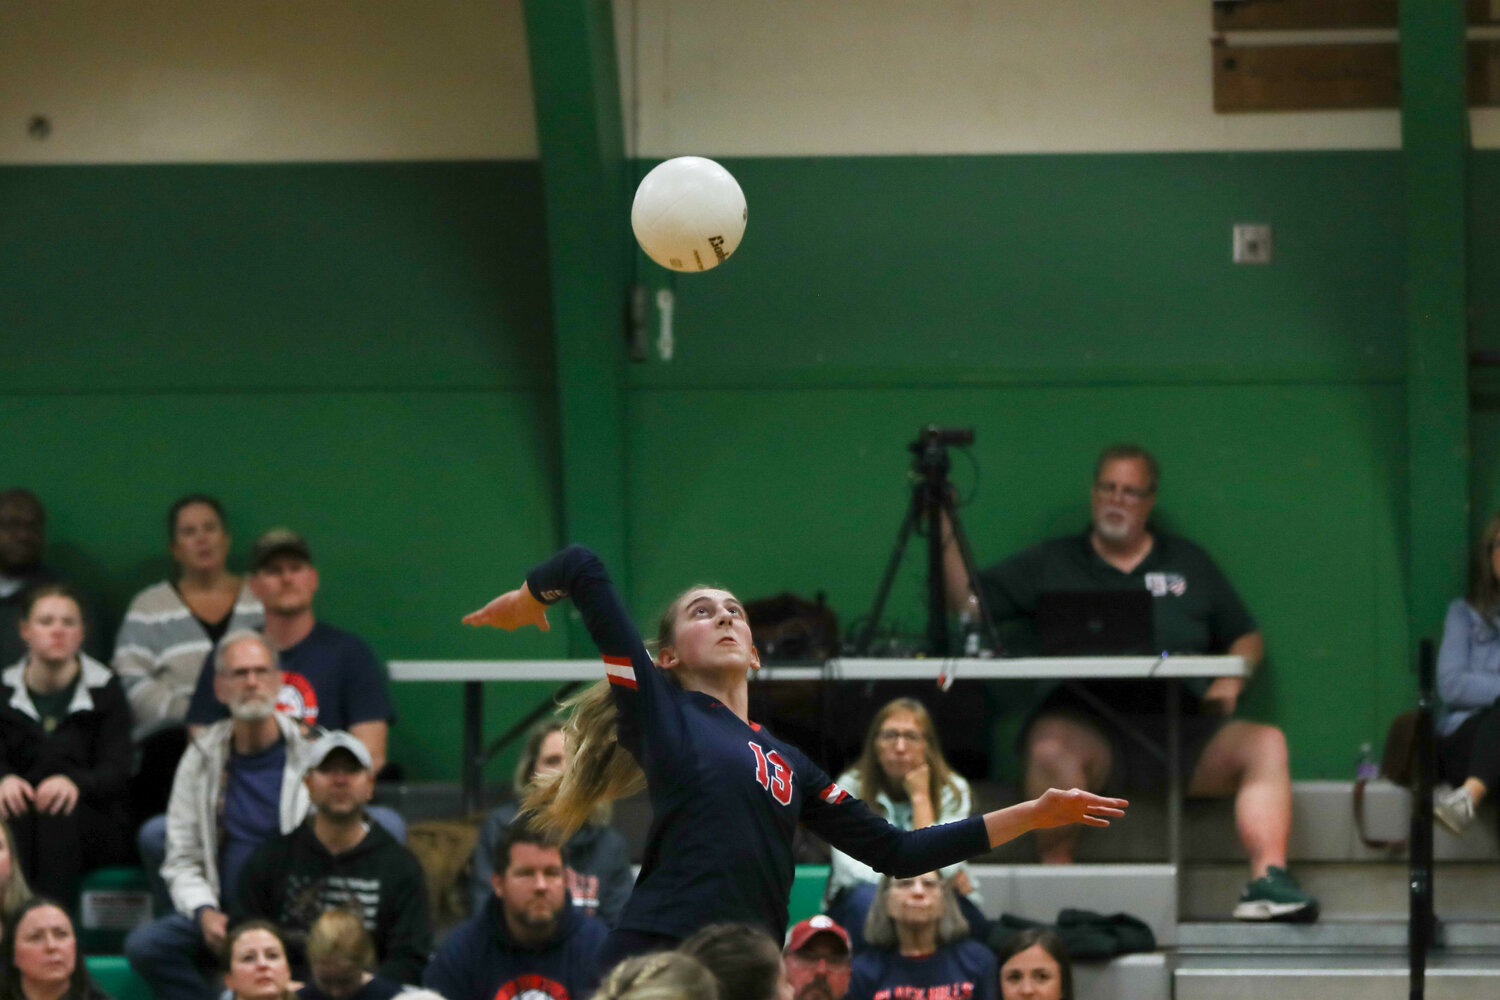 Claire Johnson leaps to hit the ball during Black Hills' 3-2 win over R.A. Long in the first round of the 2A District 4 Tournament on Nov. 2 in Tumwater.